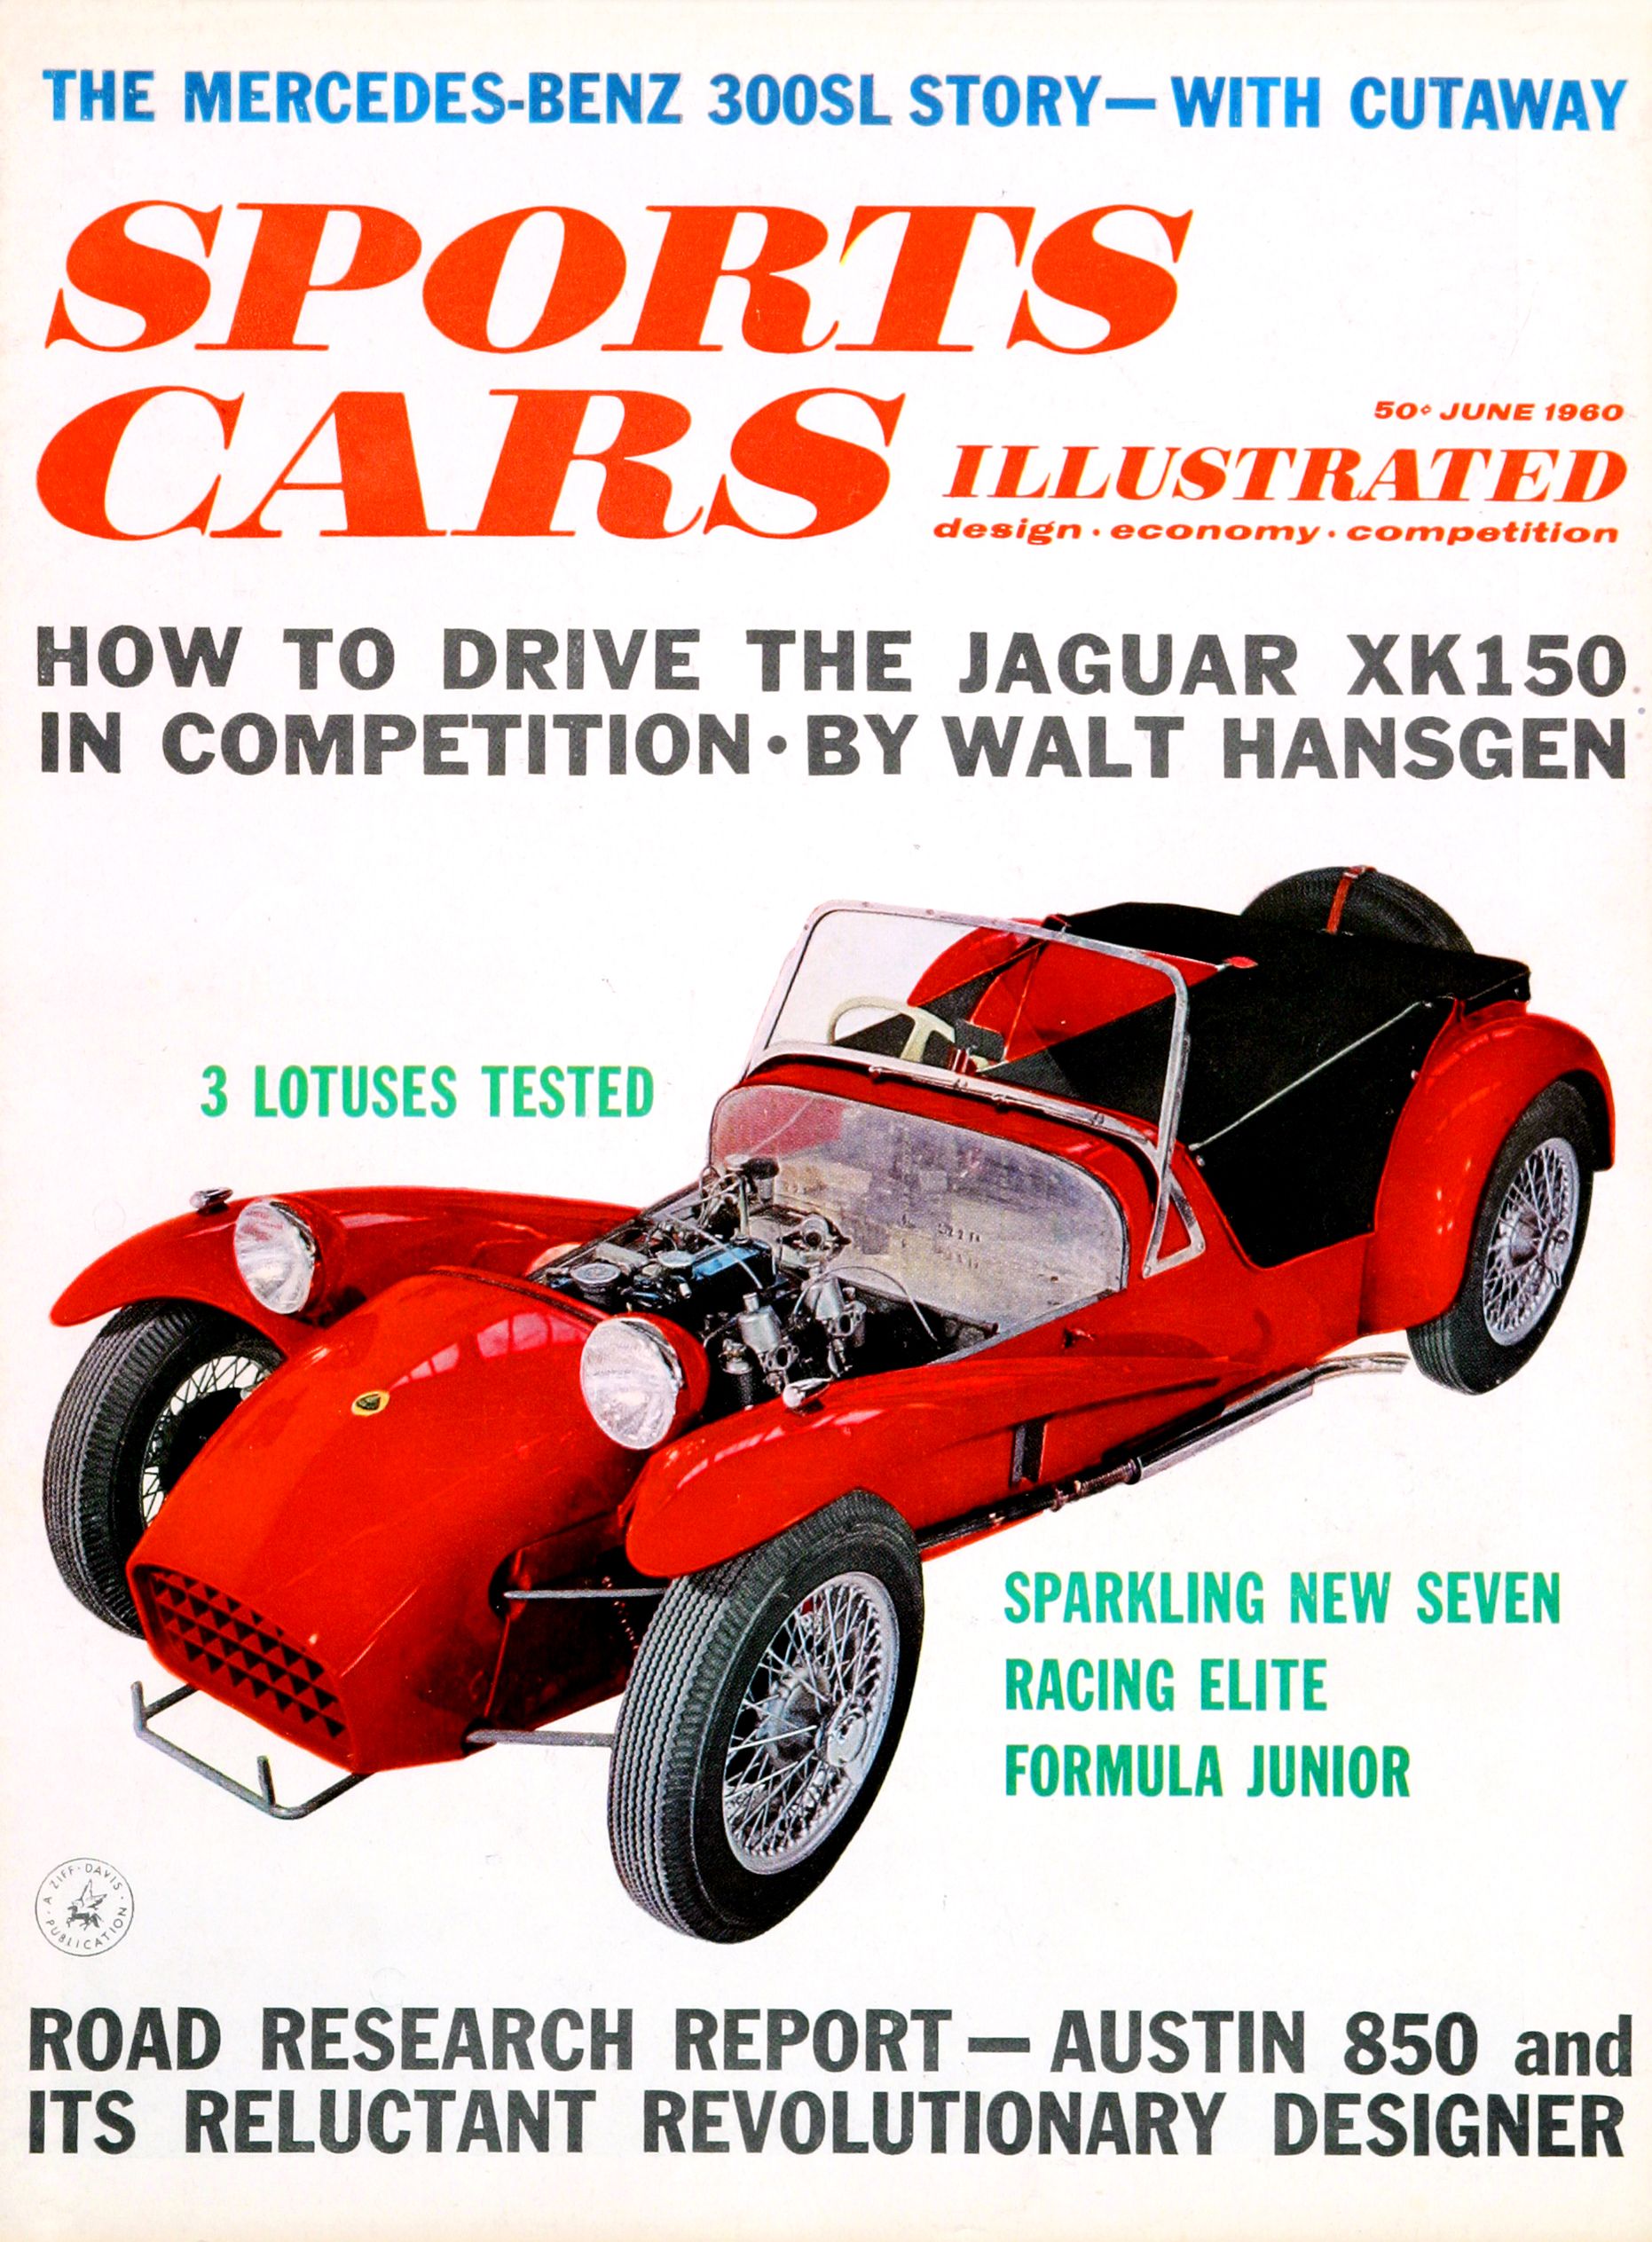 Getting Groovy and into the Groove: The Car and Driver Covers of 